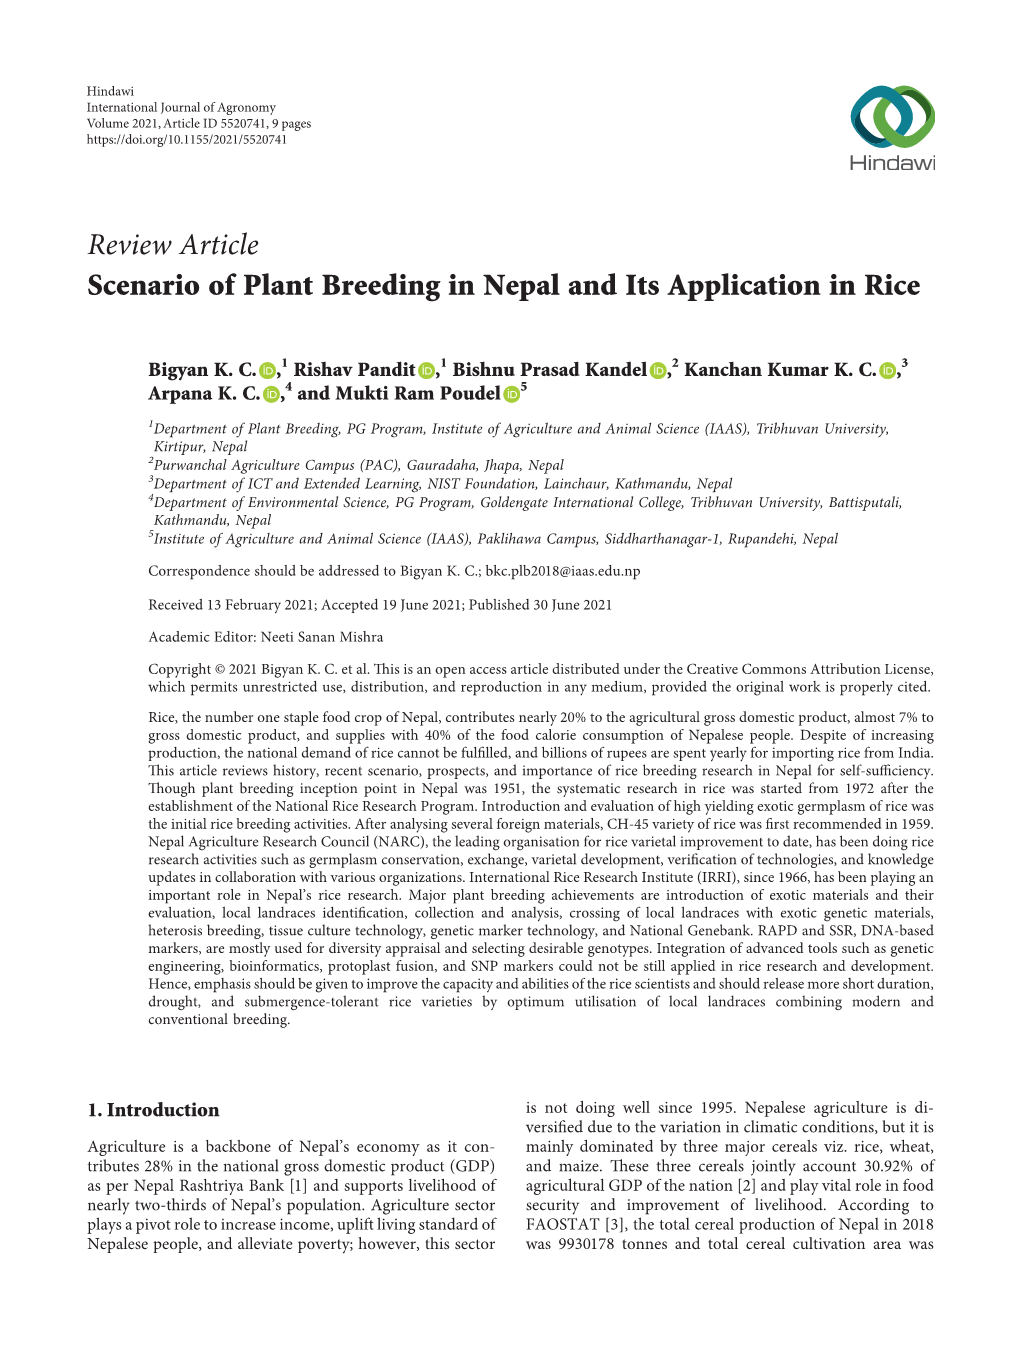 Scenario of Plant Breeding in Nepal and Its Application in Rice